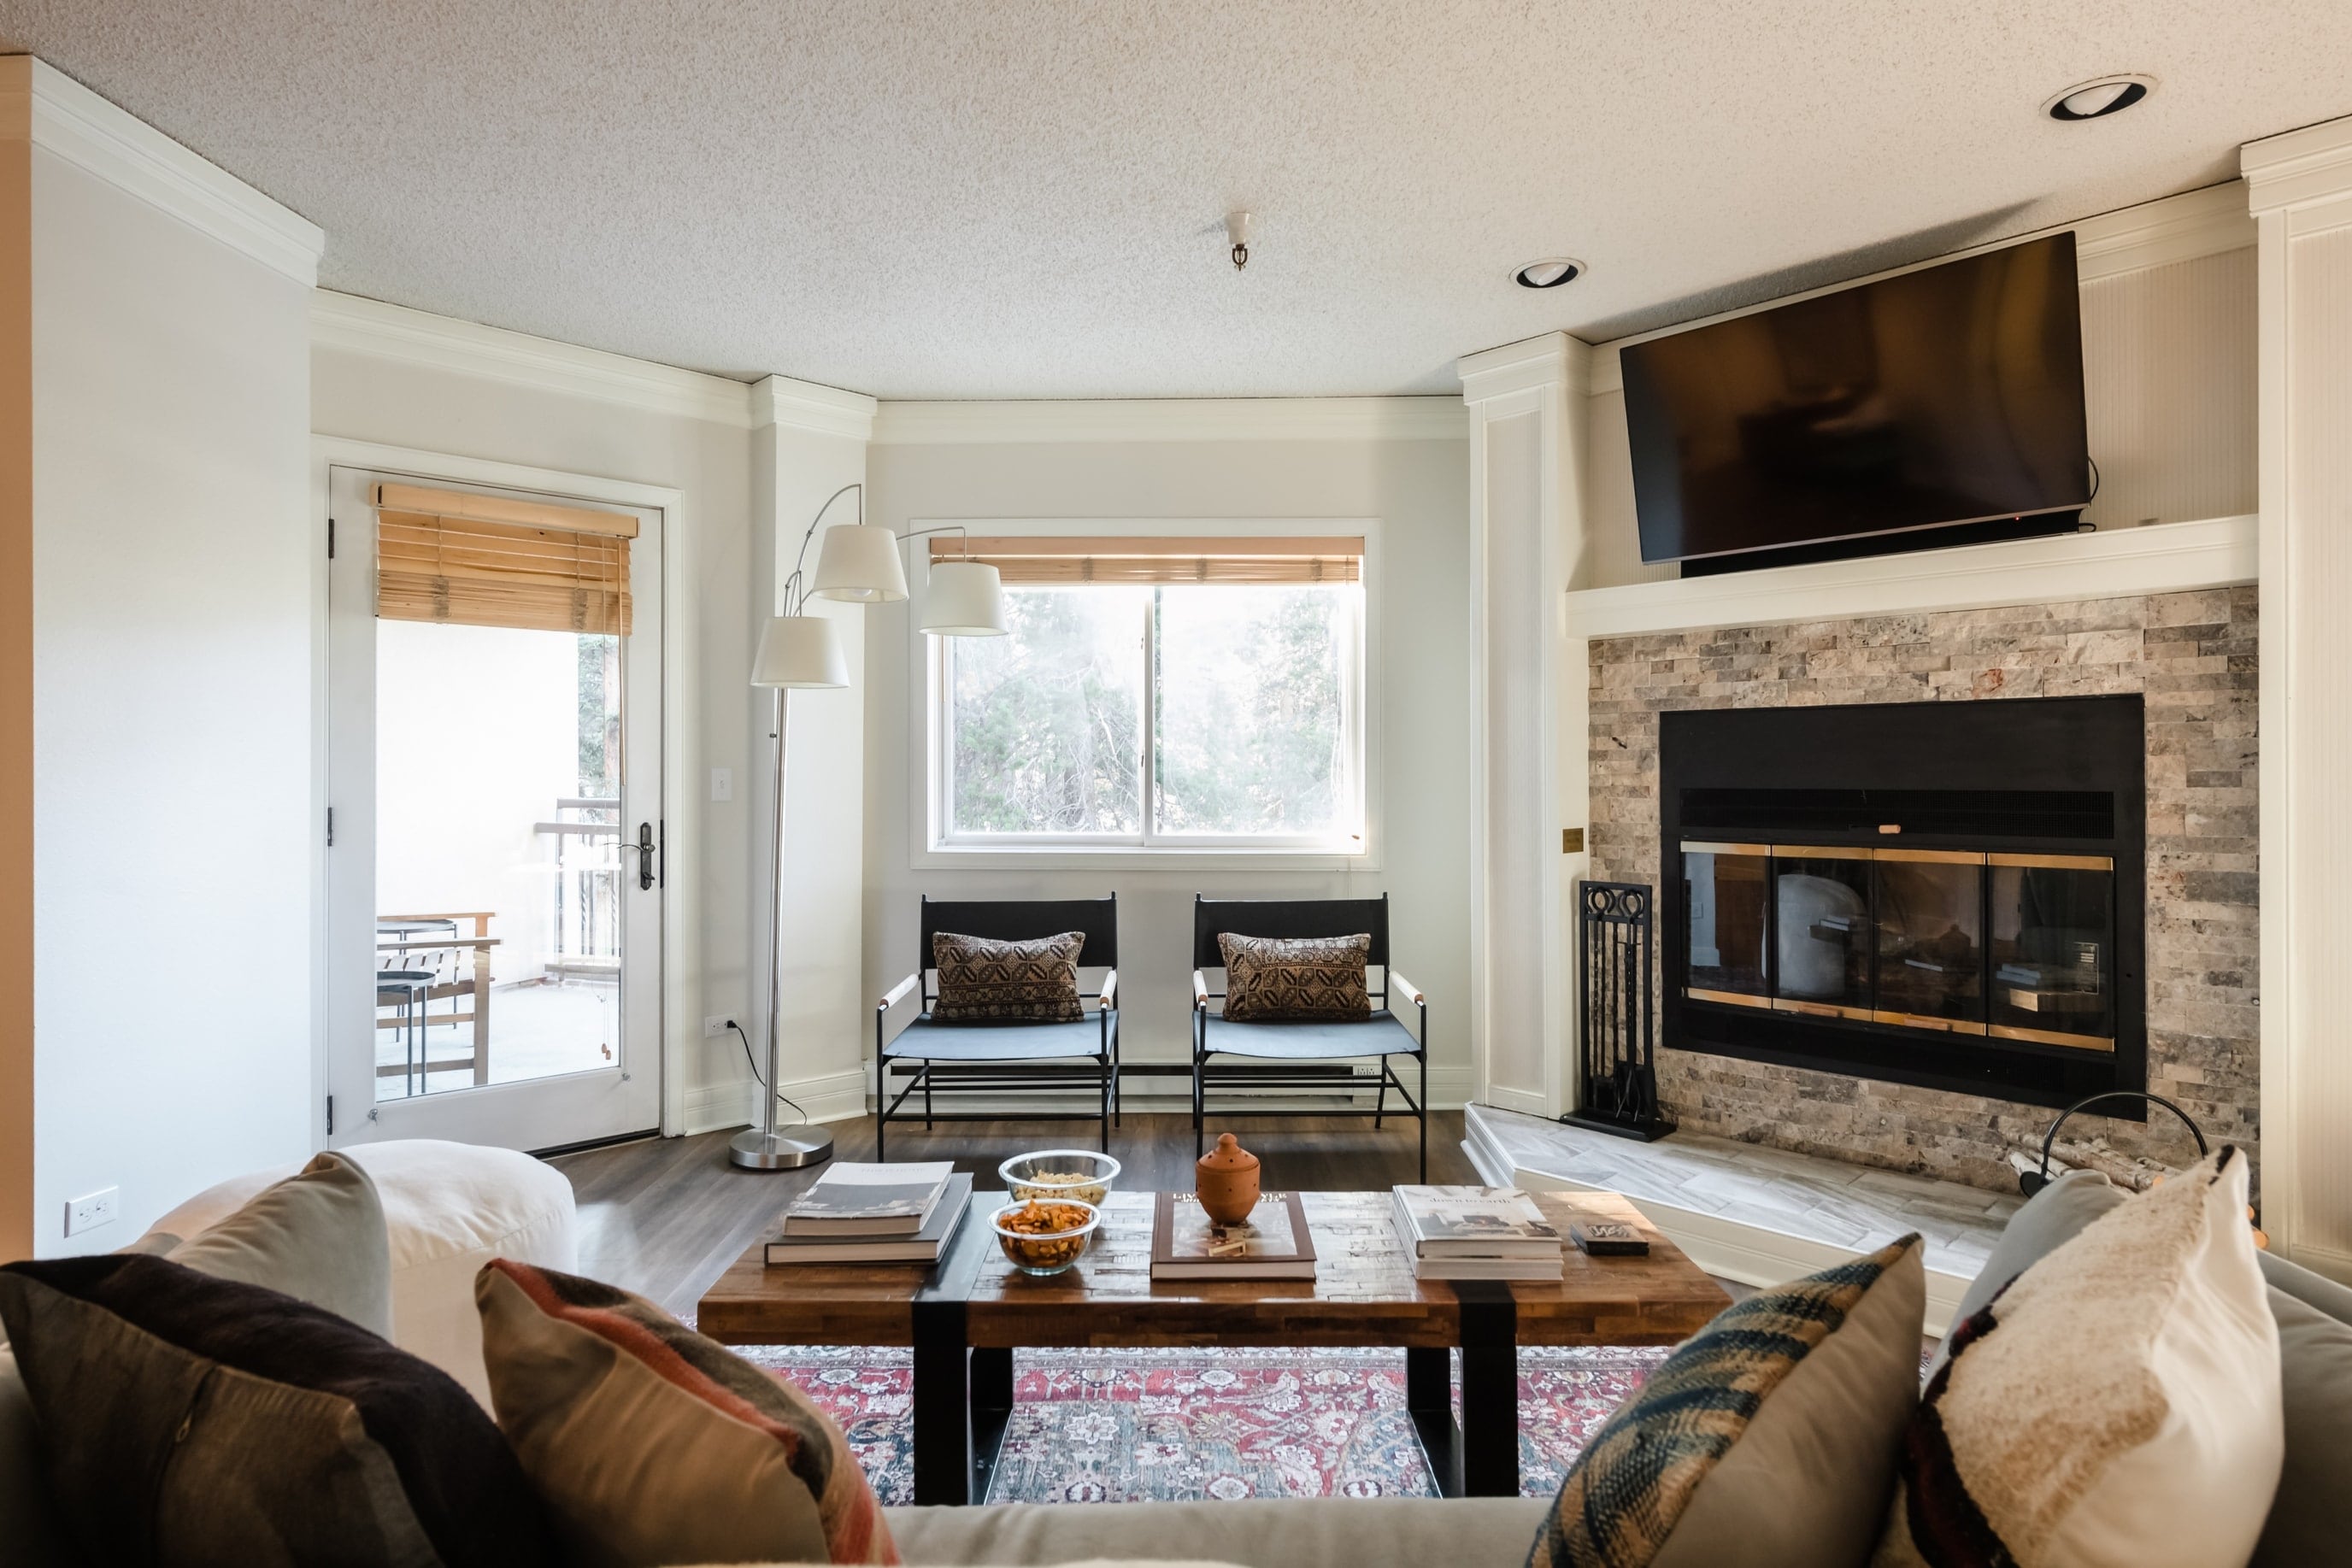 Your gorgeous Breckenridge condo located a walk away from the slopes!